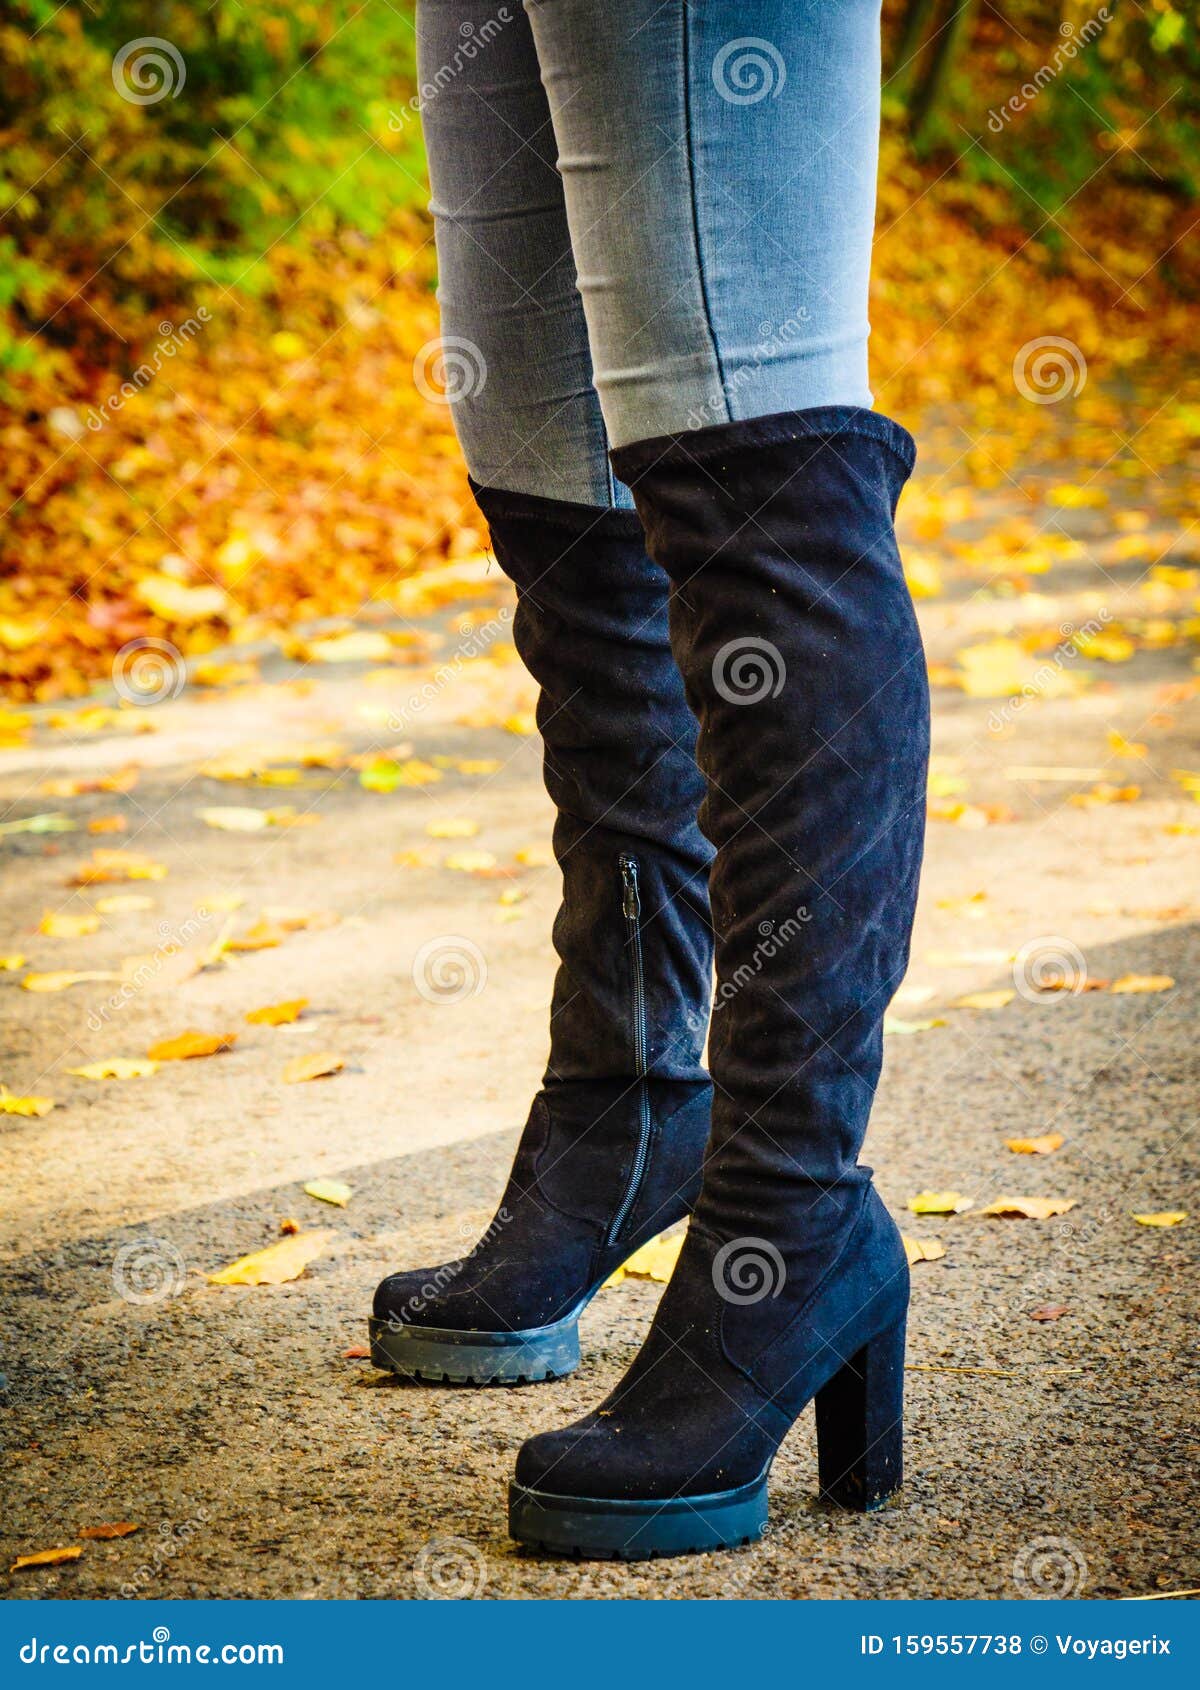 black knee high boots and jeans